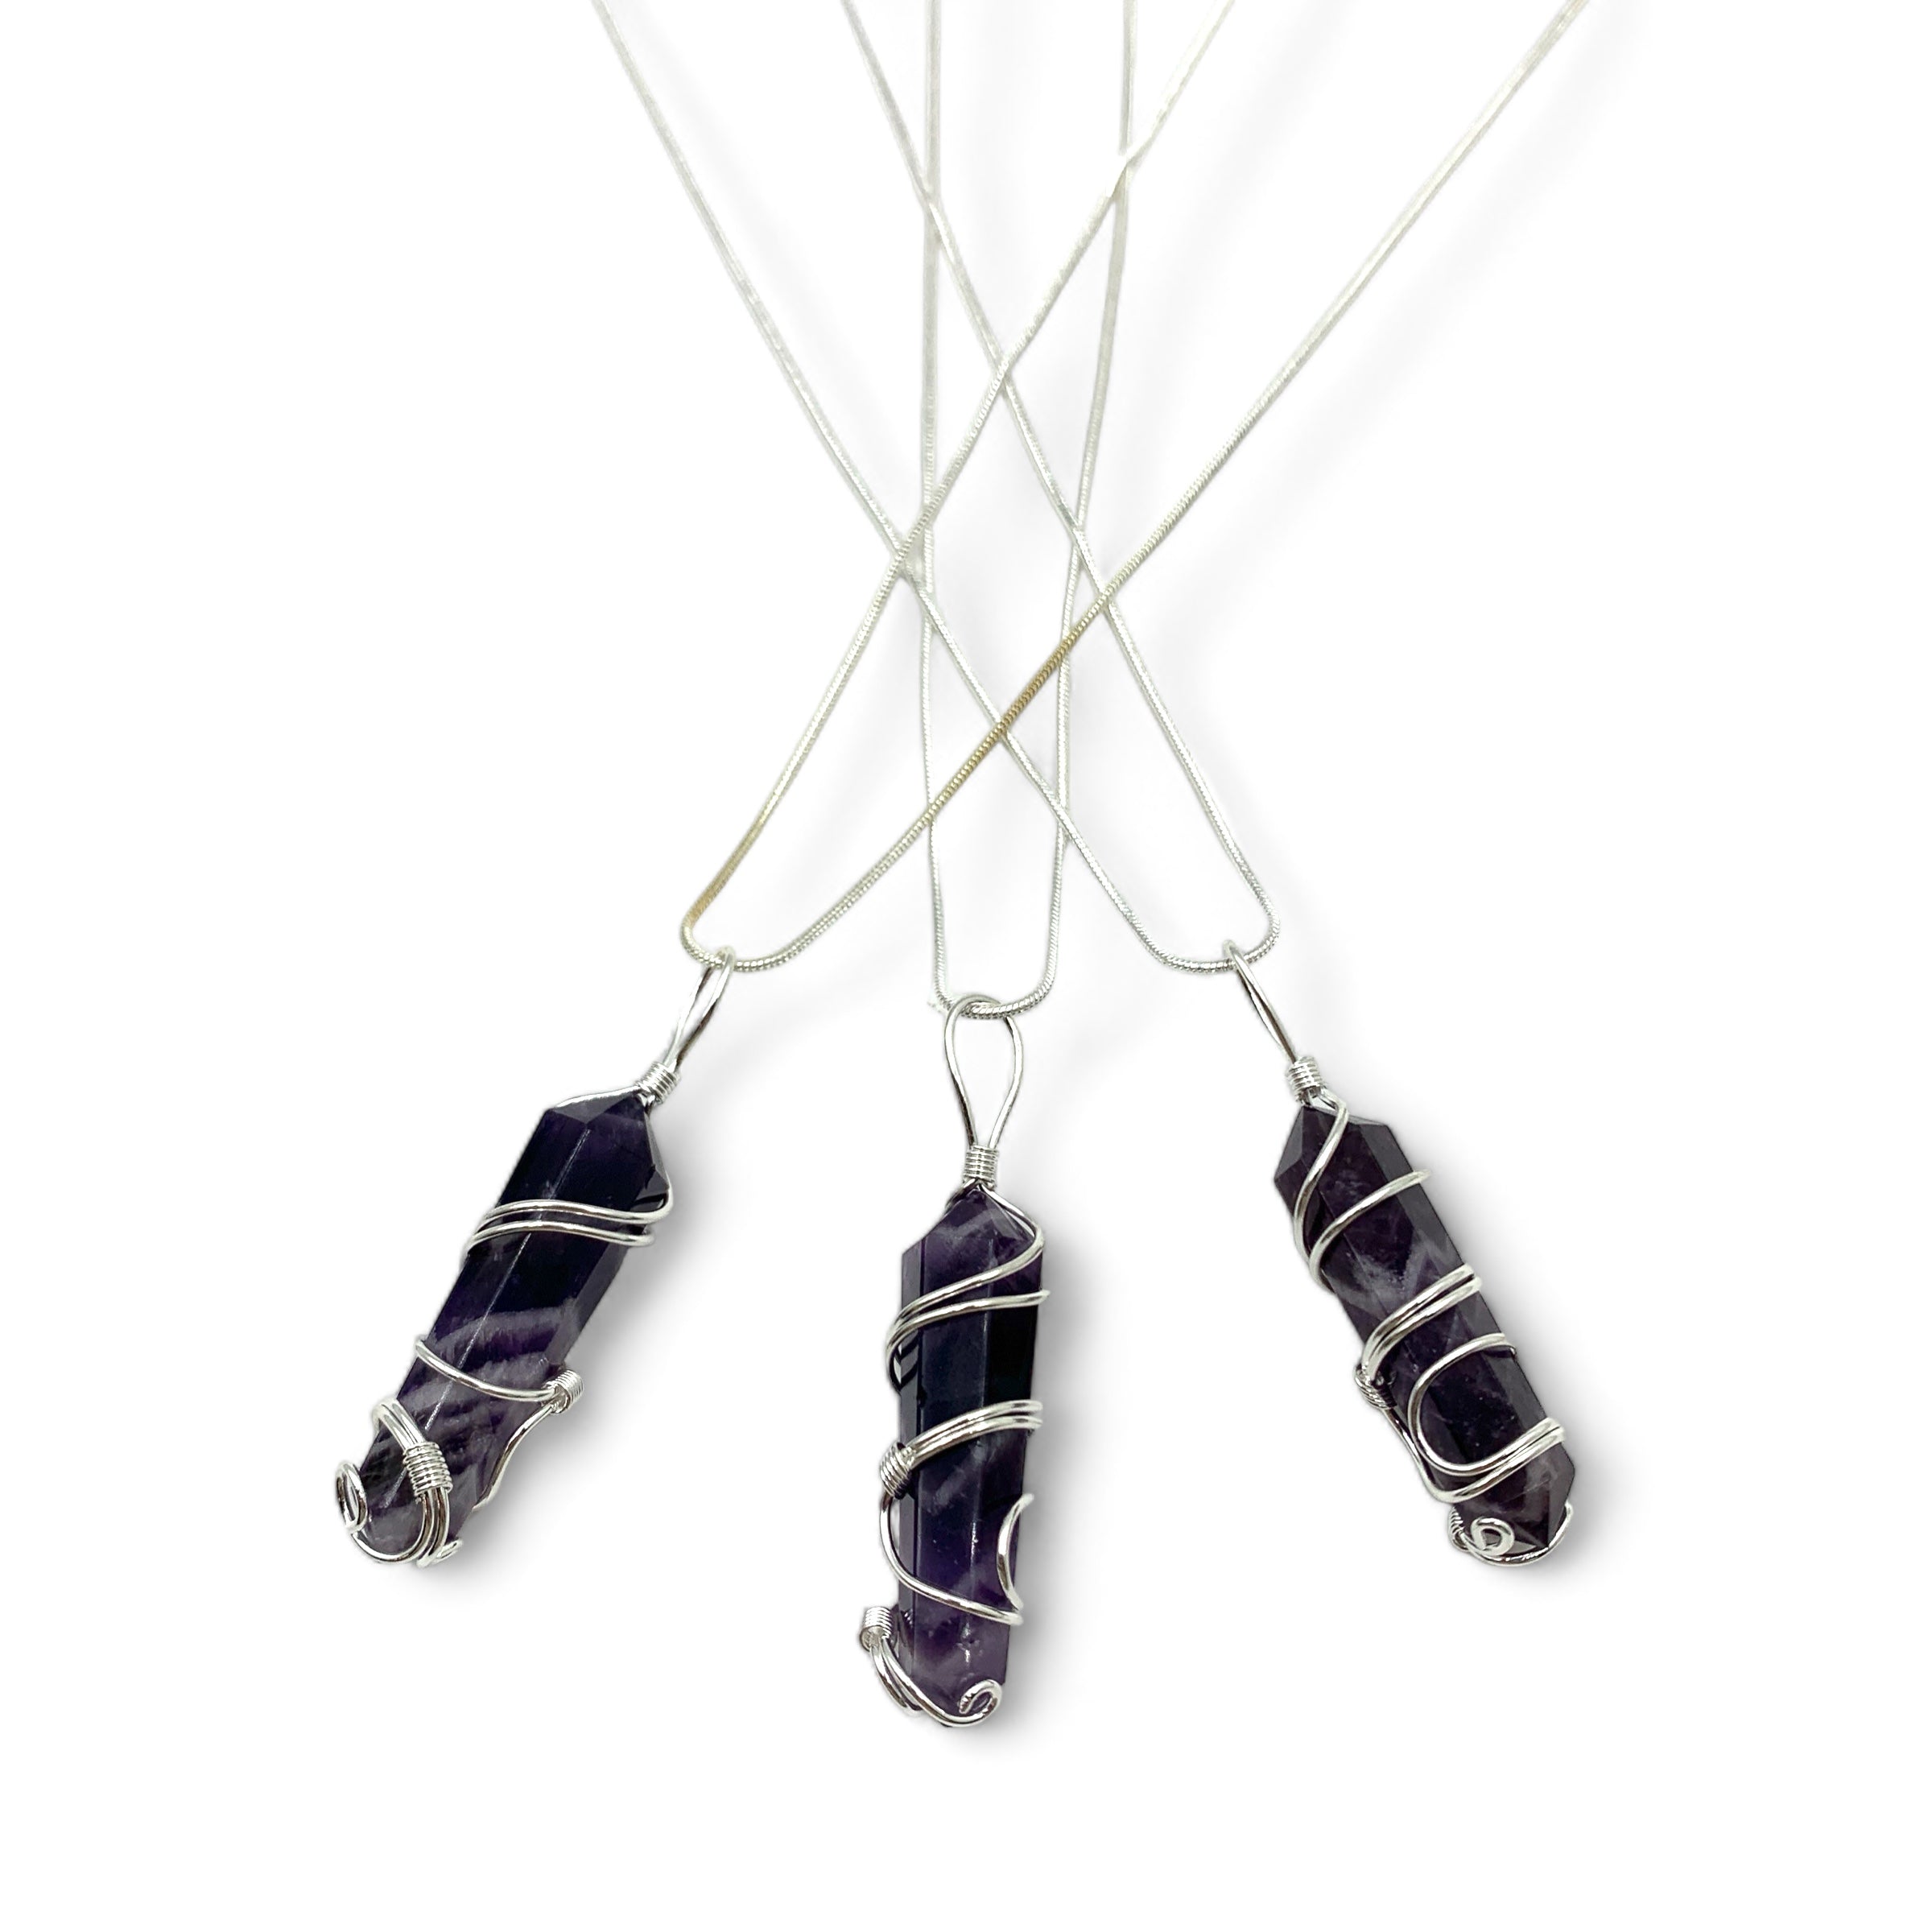 Necklace - Amethyst Crystal Point Wrapped $40